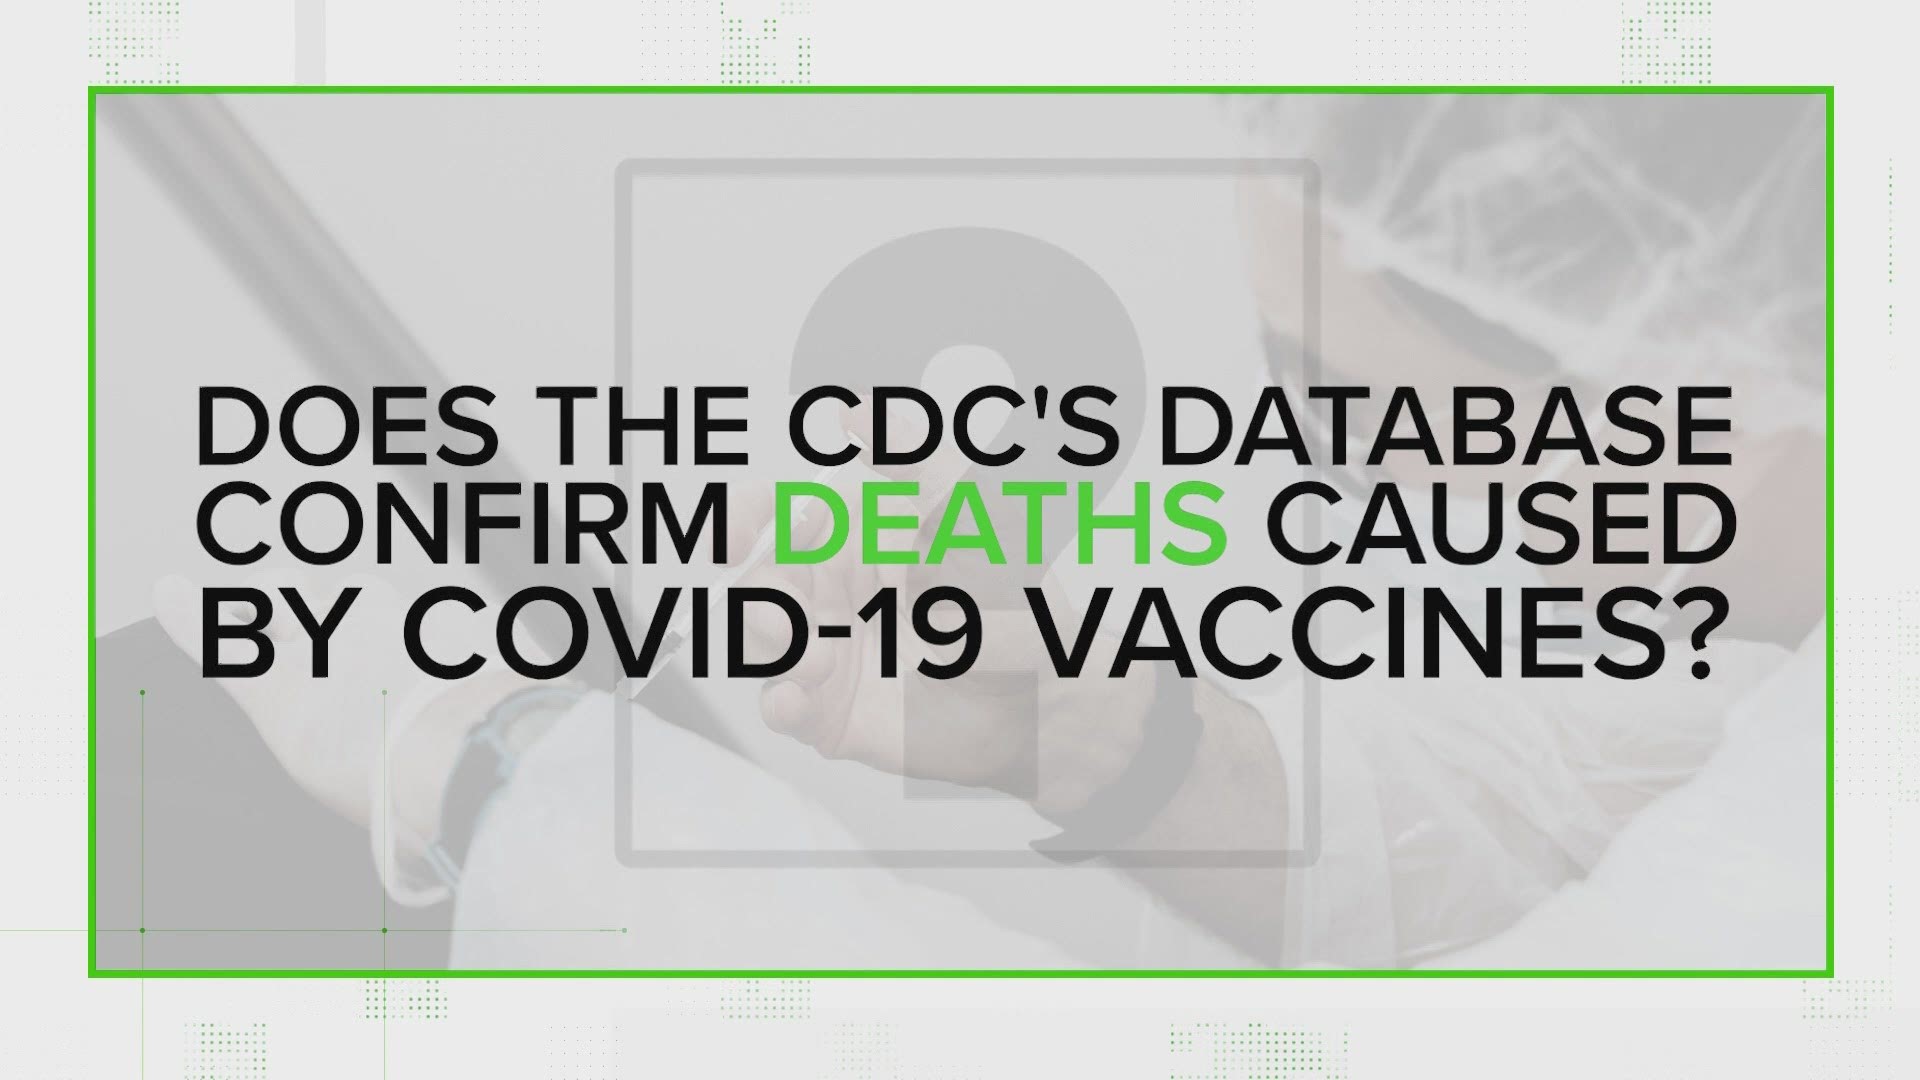 The verify team looks into claims that over 3000 people in the US have died due to receiving a COVID-19 vaccine. Here is why that's not true.